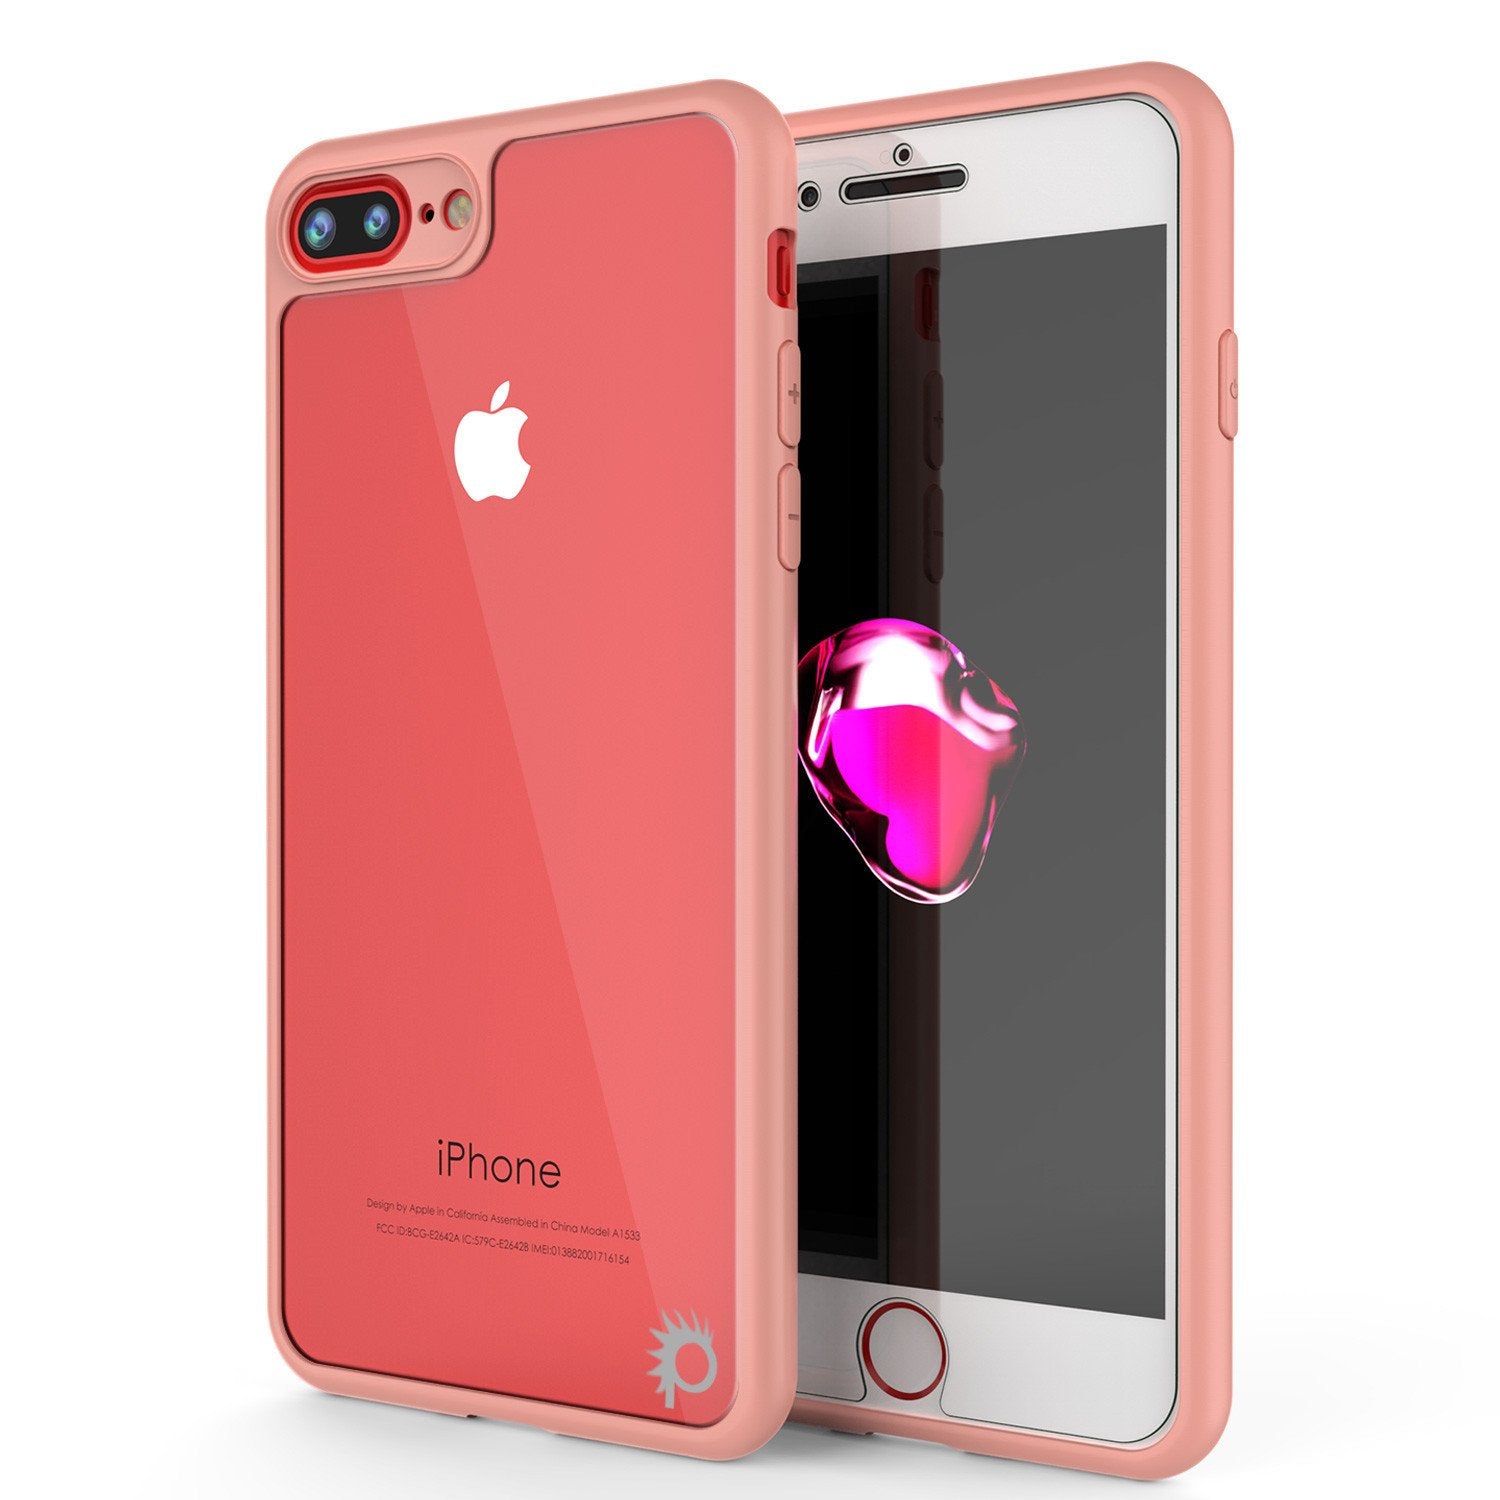 iPhone 7 PLUS Case, Punkcase [MASK Series] [PINK] Full Body Hybrid Dual Layer TPU Cover [Clear Back] [Non Slip] [Ultra Thin Fit] W/ protective Tempered Glass Screen Protector for Apple iPhone 7s PLUS